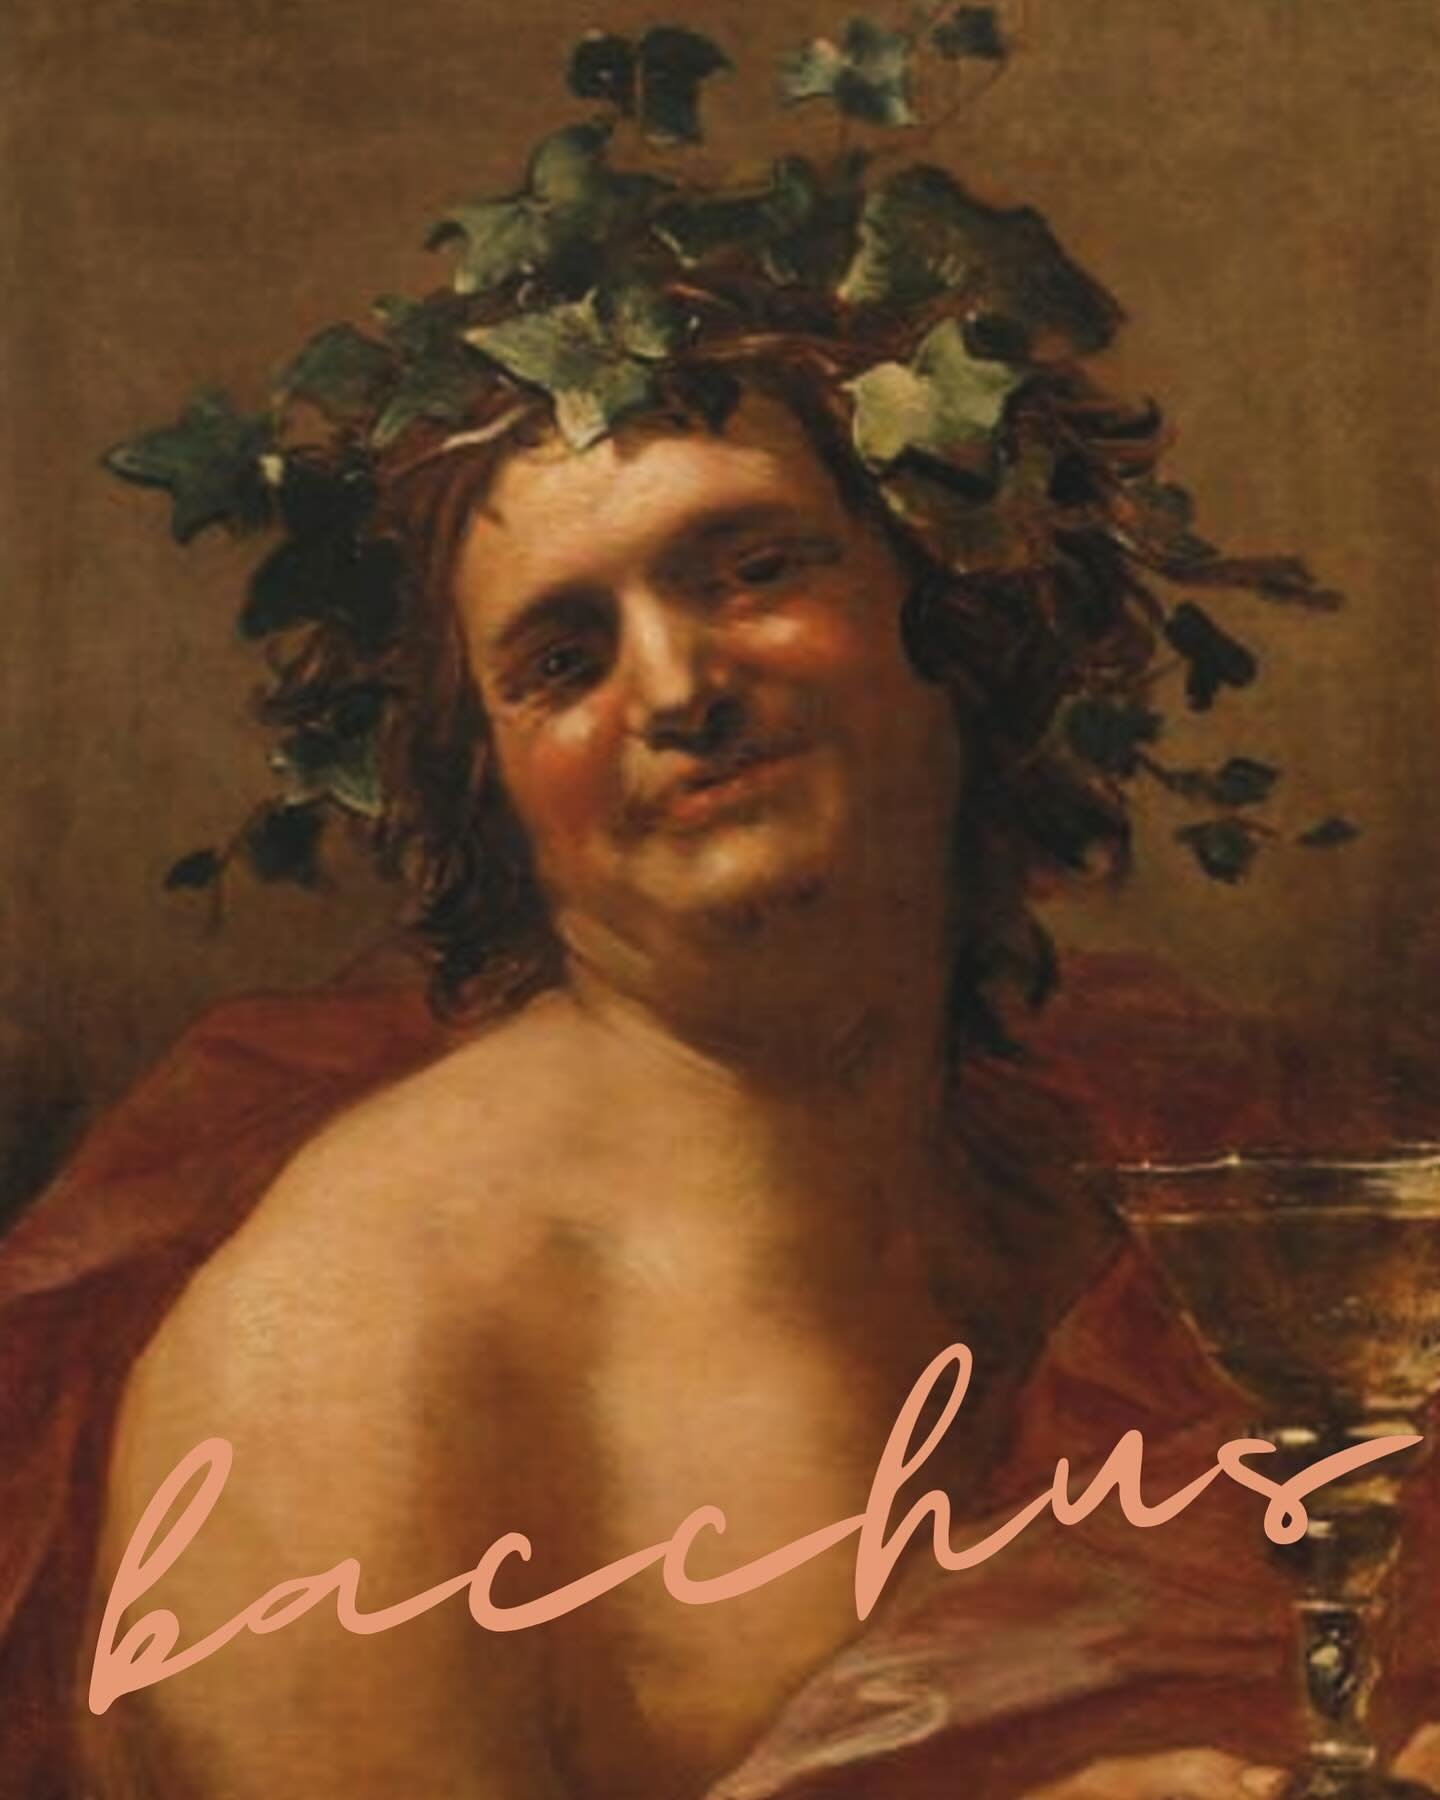 When you find out Chris is bartending tonight. #bacchus #winegod #cocktails